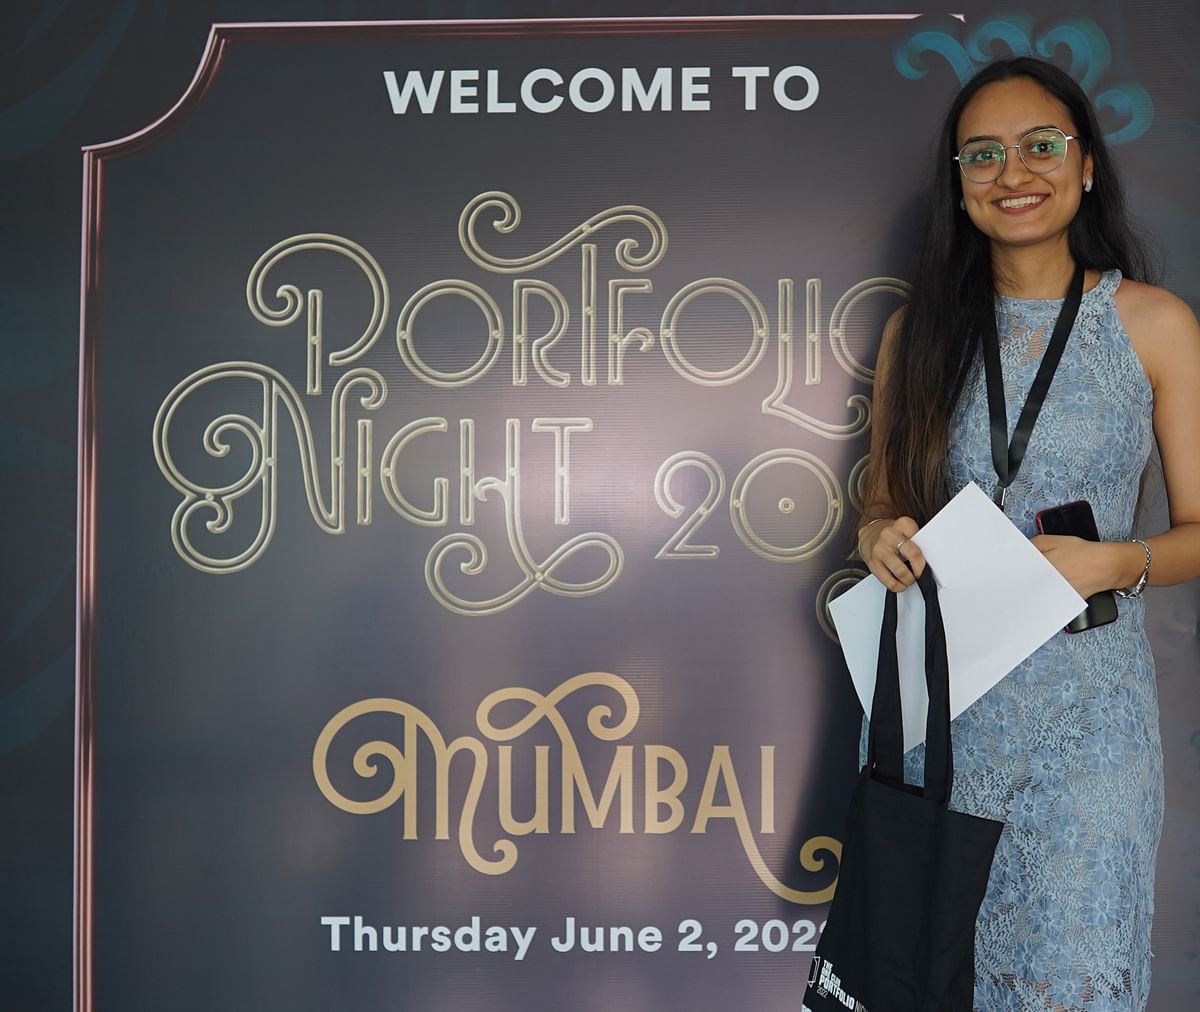 One Club’s Portfolio Night returned to an in-person event after 2019